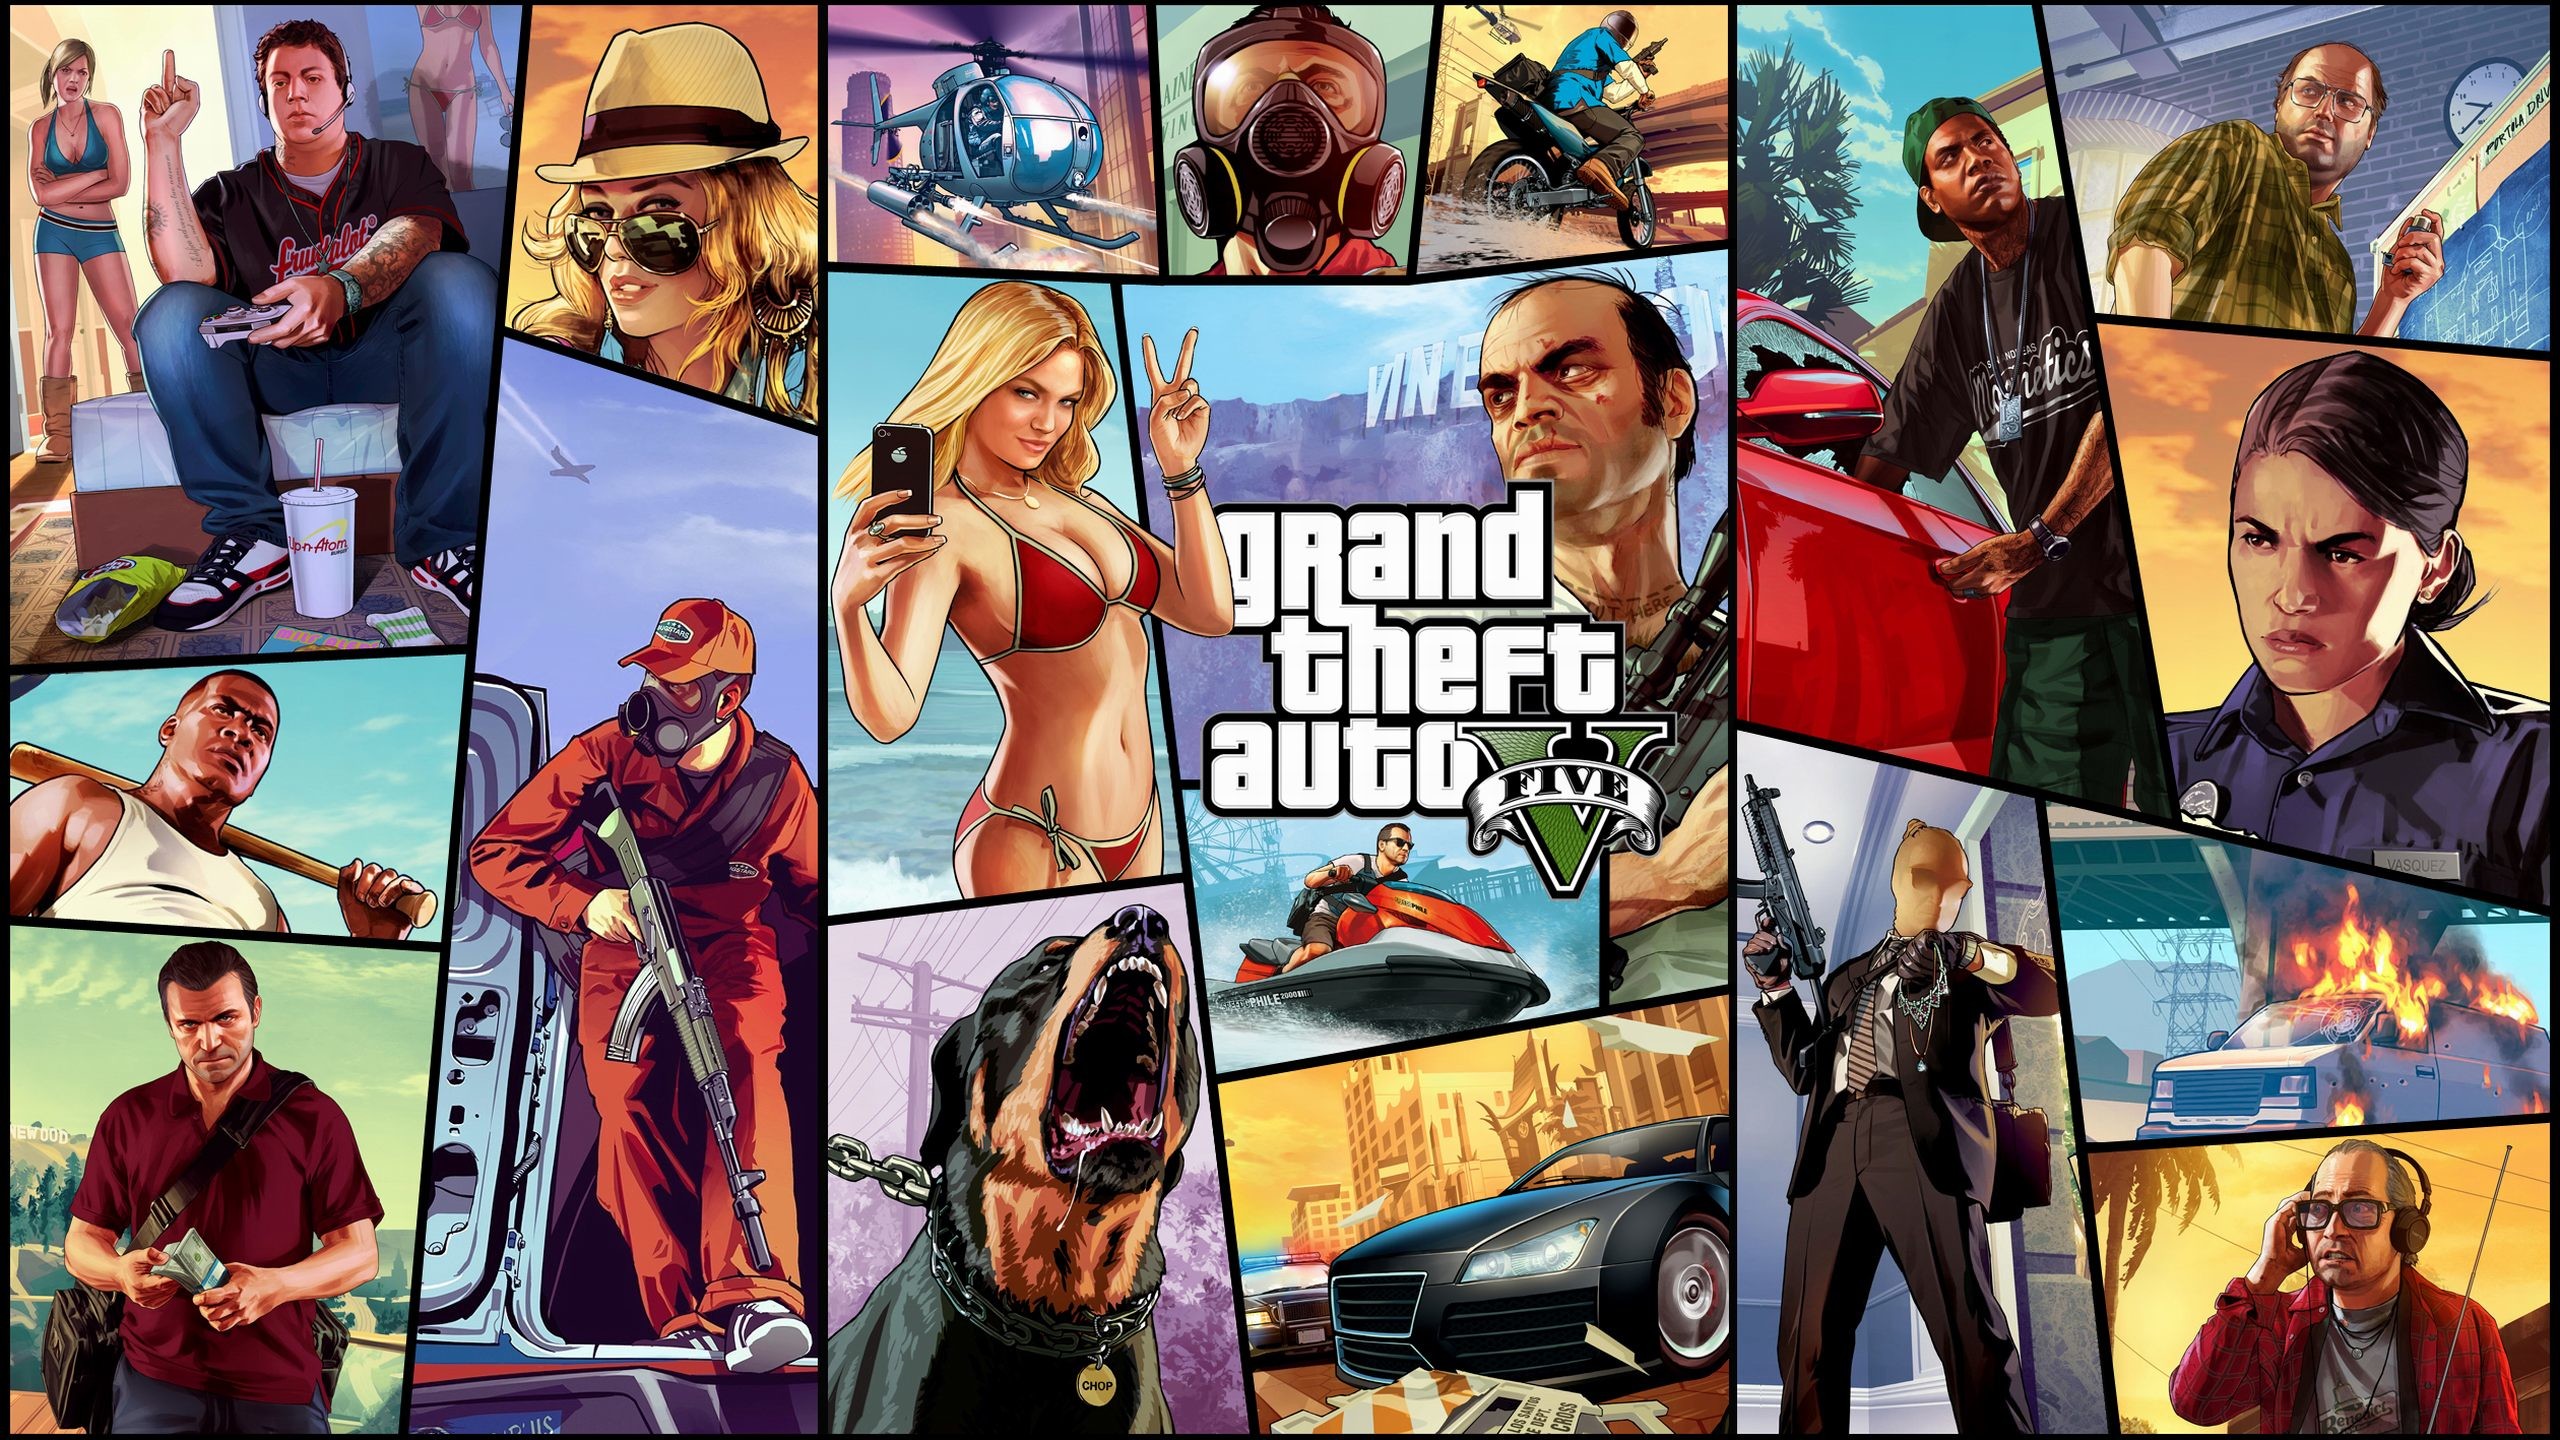 2560x1440 ... grand theft auto wallpaper wallpapers browse ...